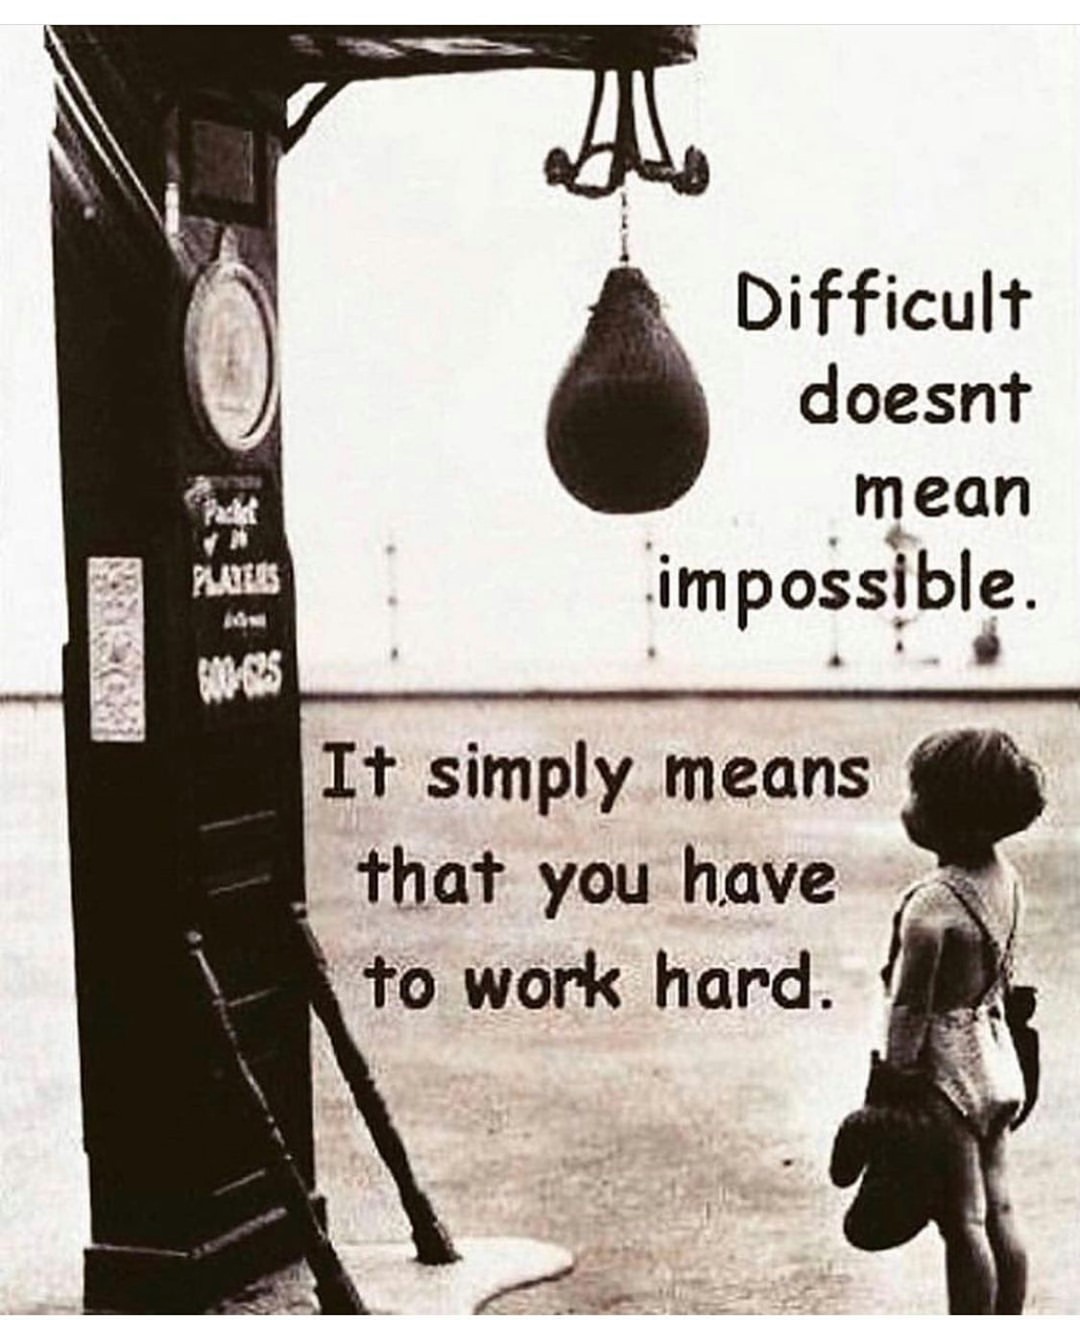 Difficult doesn't mean impossible. It simply means that you have to work hard.